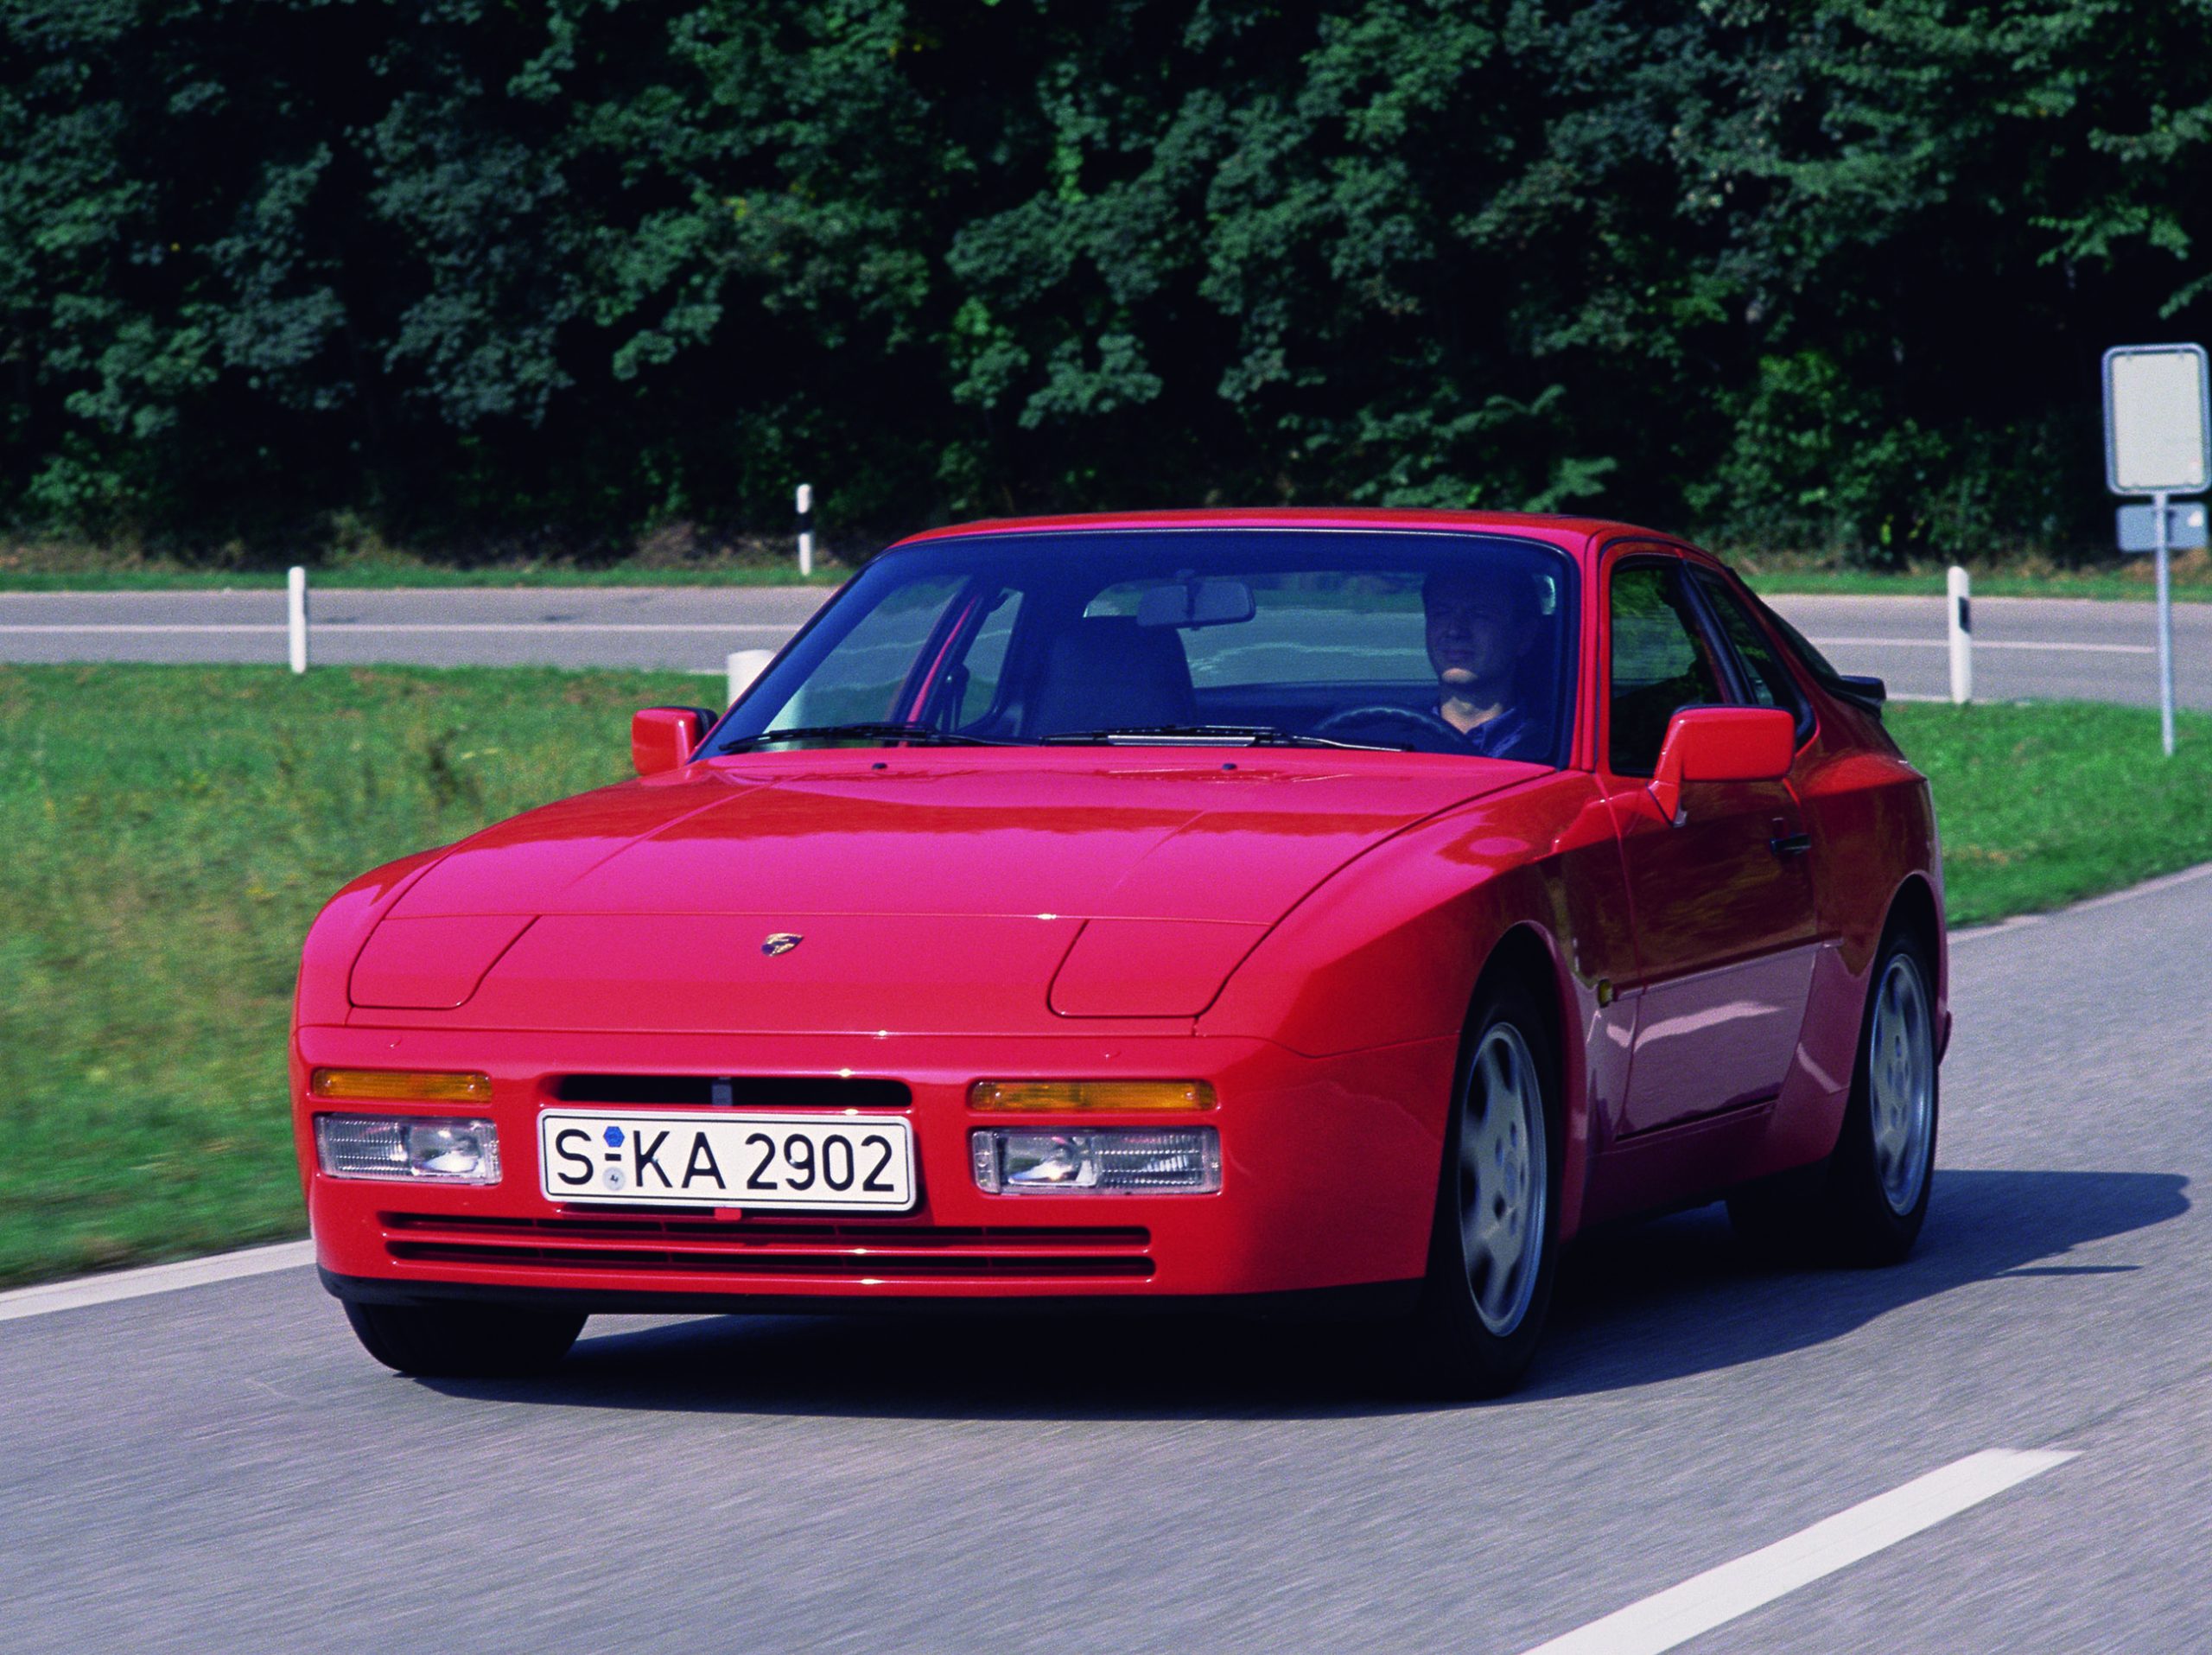 Image of classic red Porsche 944 driving on road